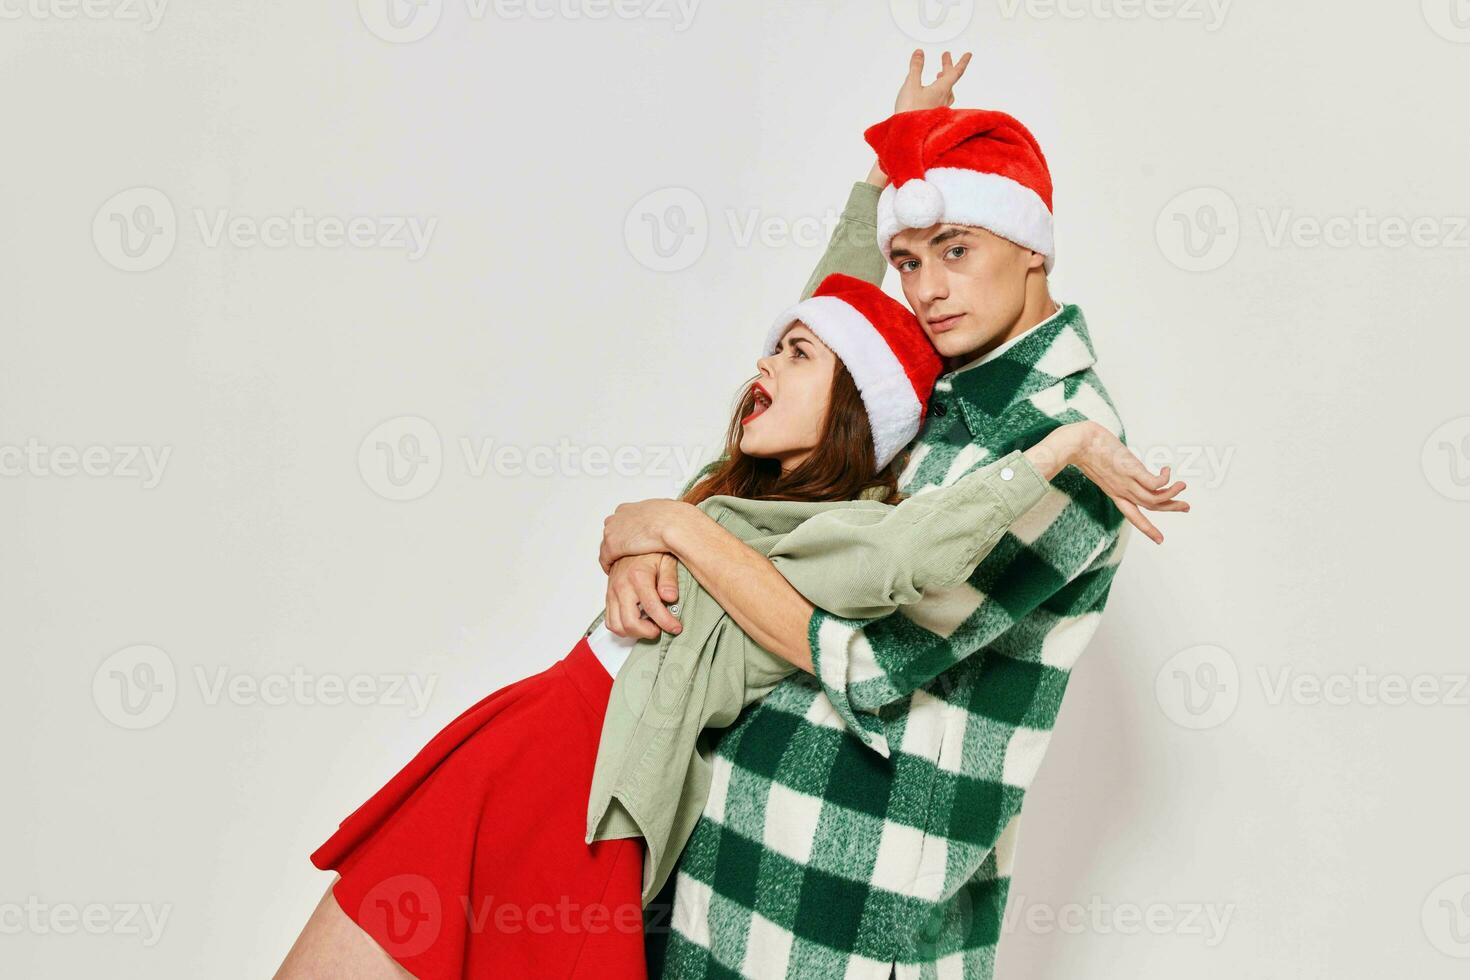 Man and woman lifestyle friendship relationship holiday New Year photo